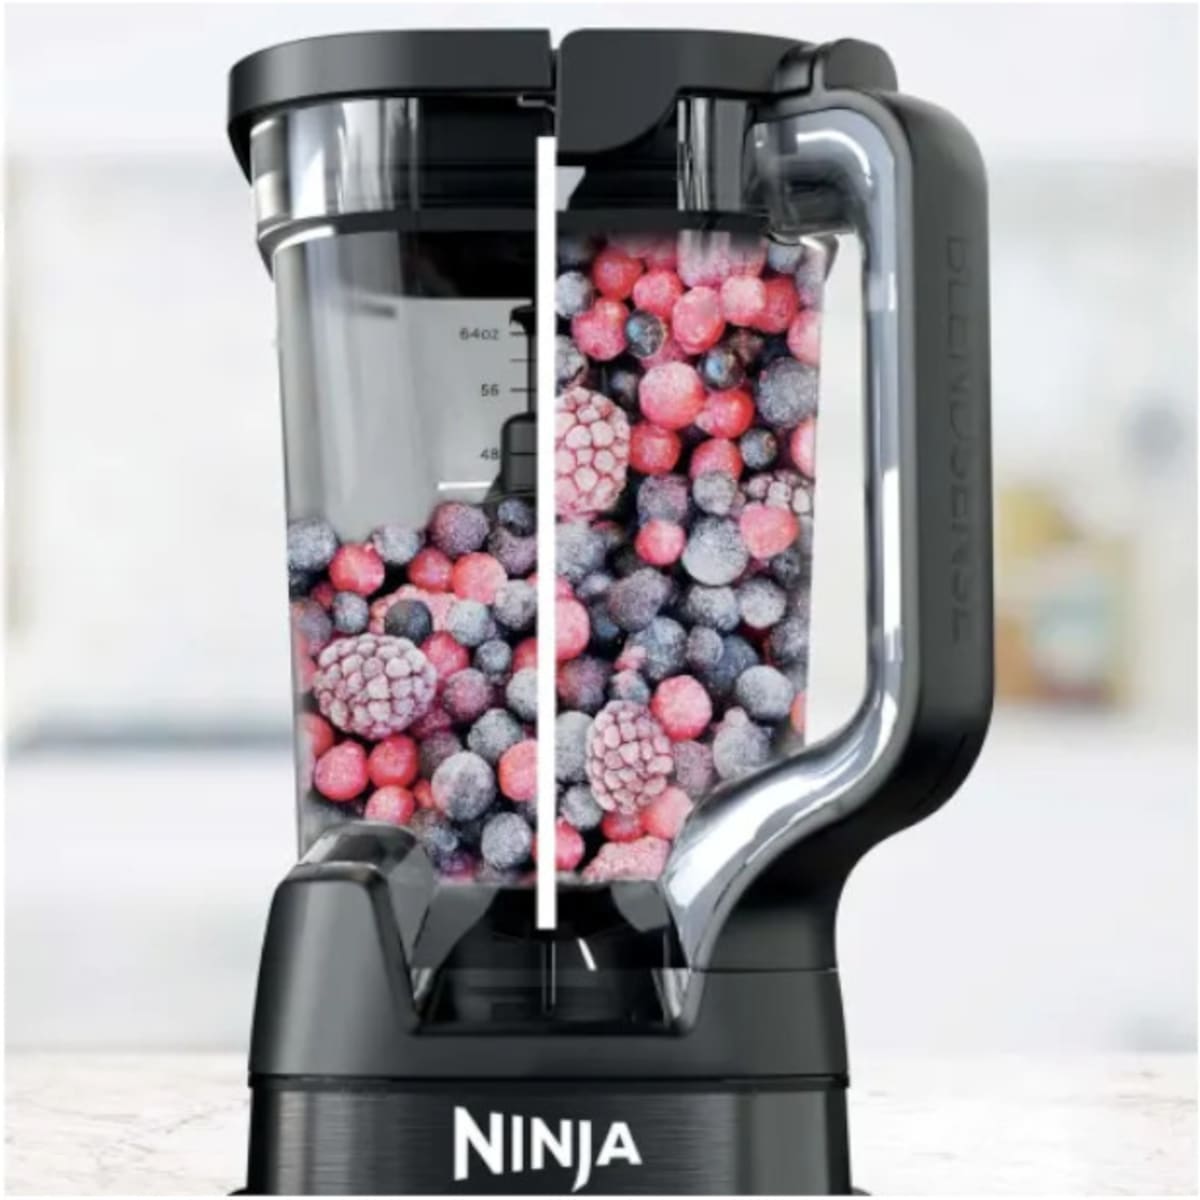 Press one button and this Ninja will slice up a smoothie (pictures